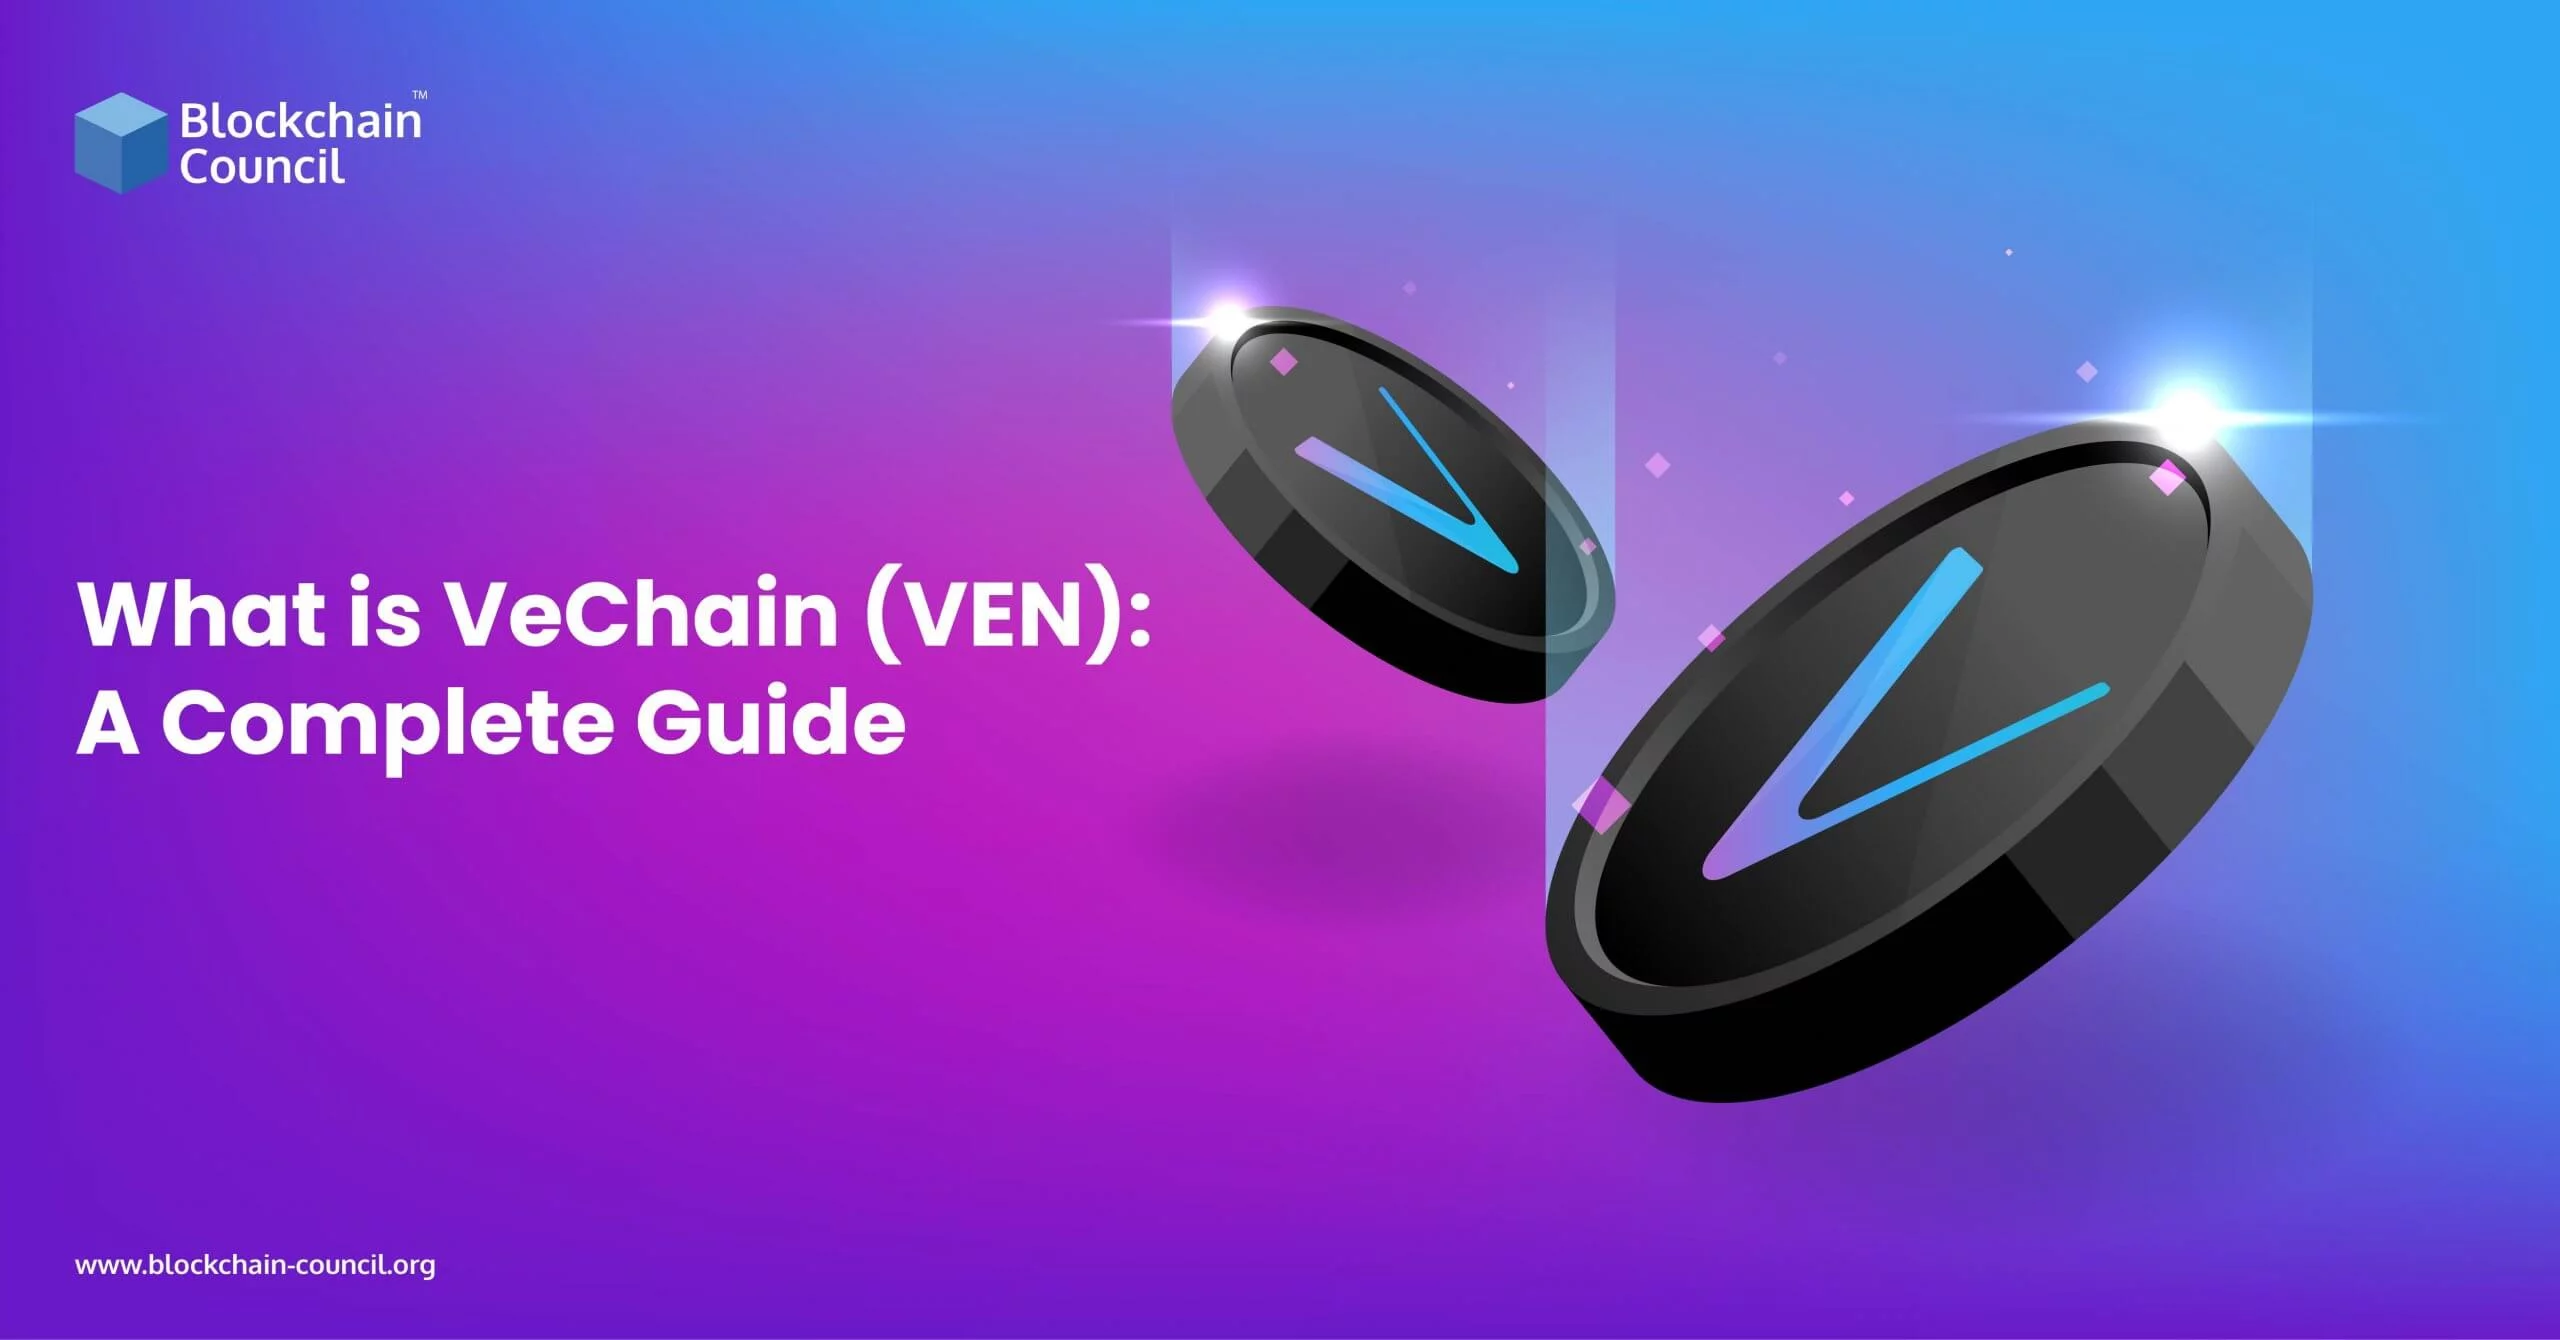 What is VeChain (VEN): A Complete Guide